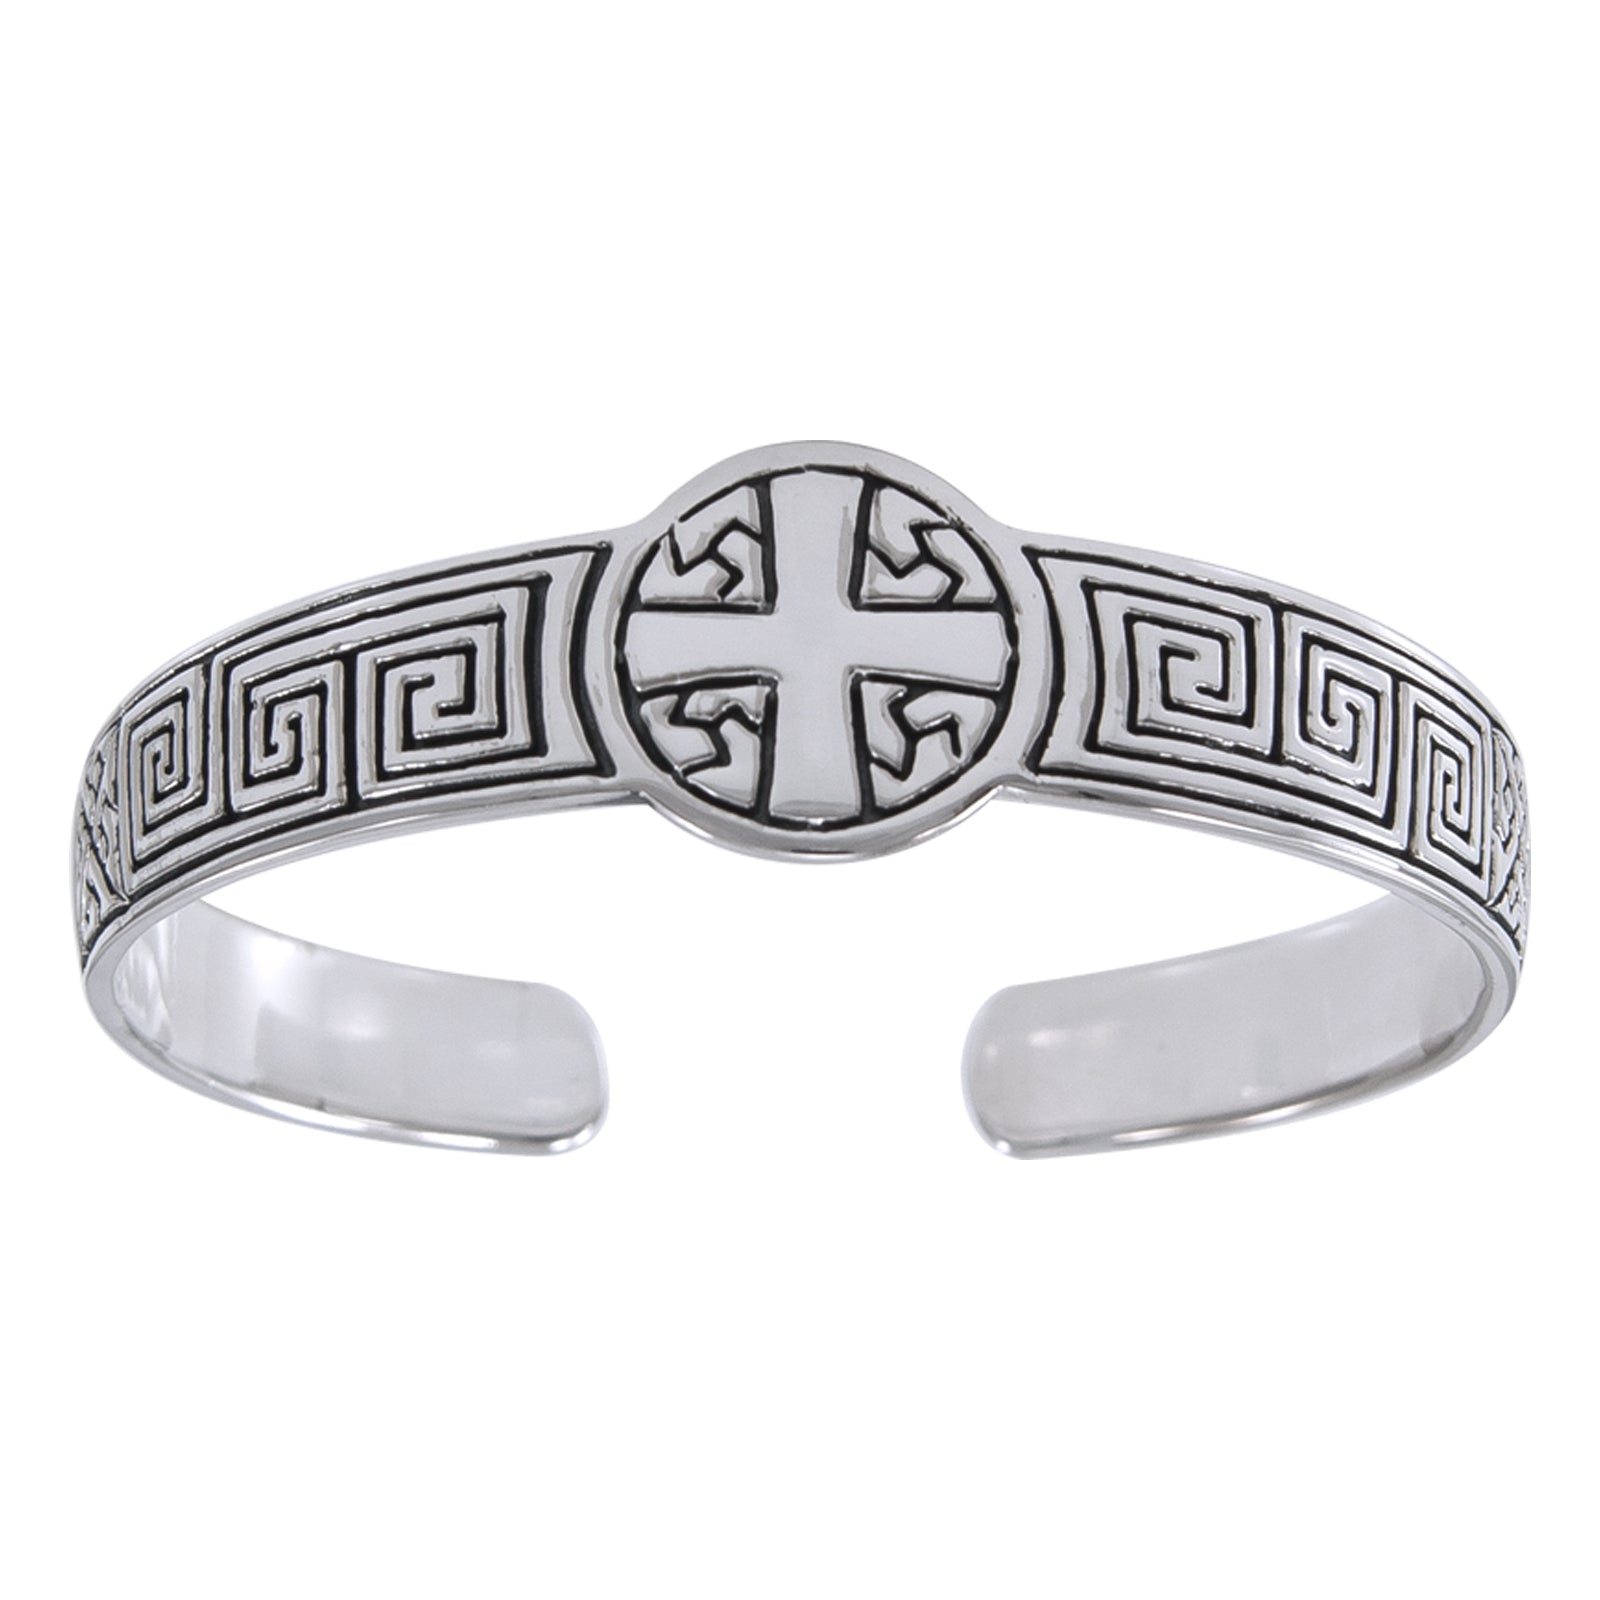 Greek Square Spiral Sturdy Sterling Silver Heavy Weight Adjustable Cross Cuff Bracelet - Silver Insanity